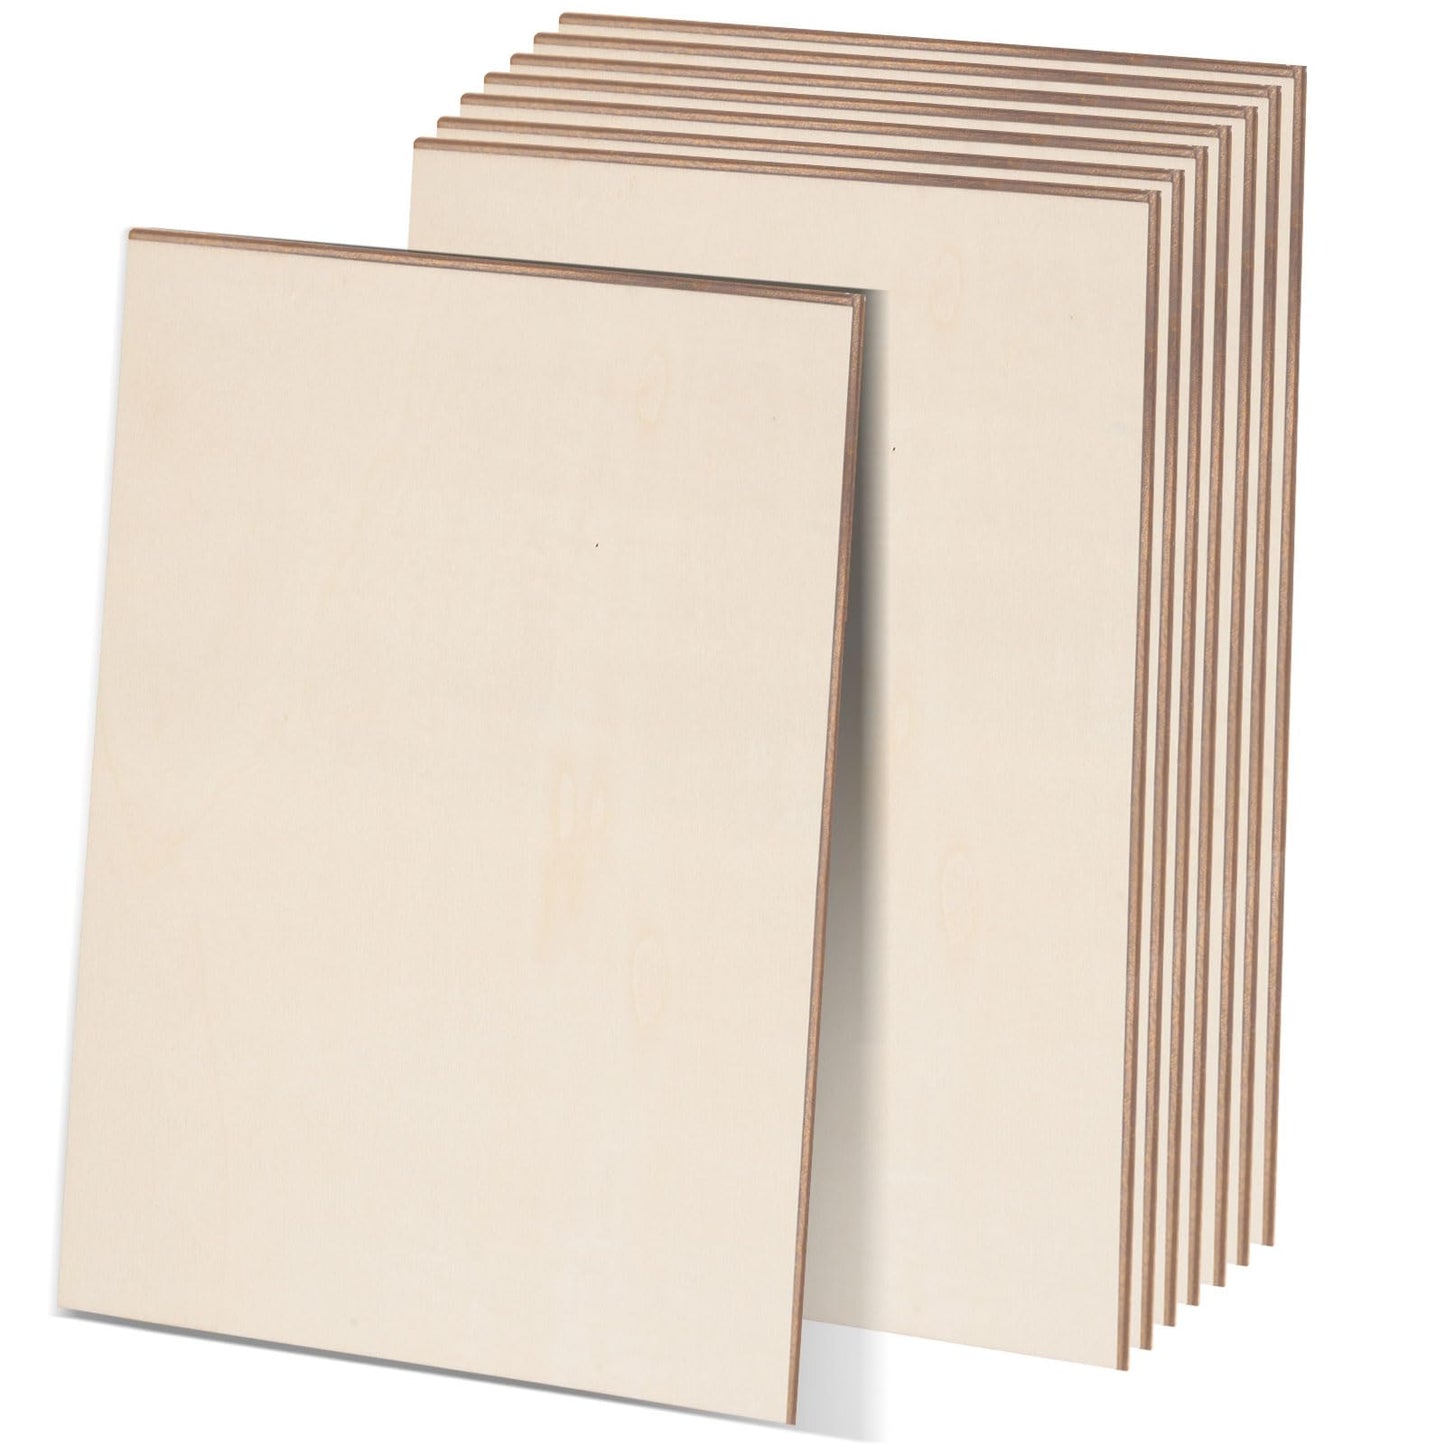 12 Pack Basswood Plywood Sheets 8 x 12 x 1/5 Inch-5 mm Thick Basswood Plywood Board Wood Squares Sheets Natural Unfinished Wood for Crafts, Painting,